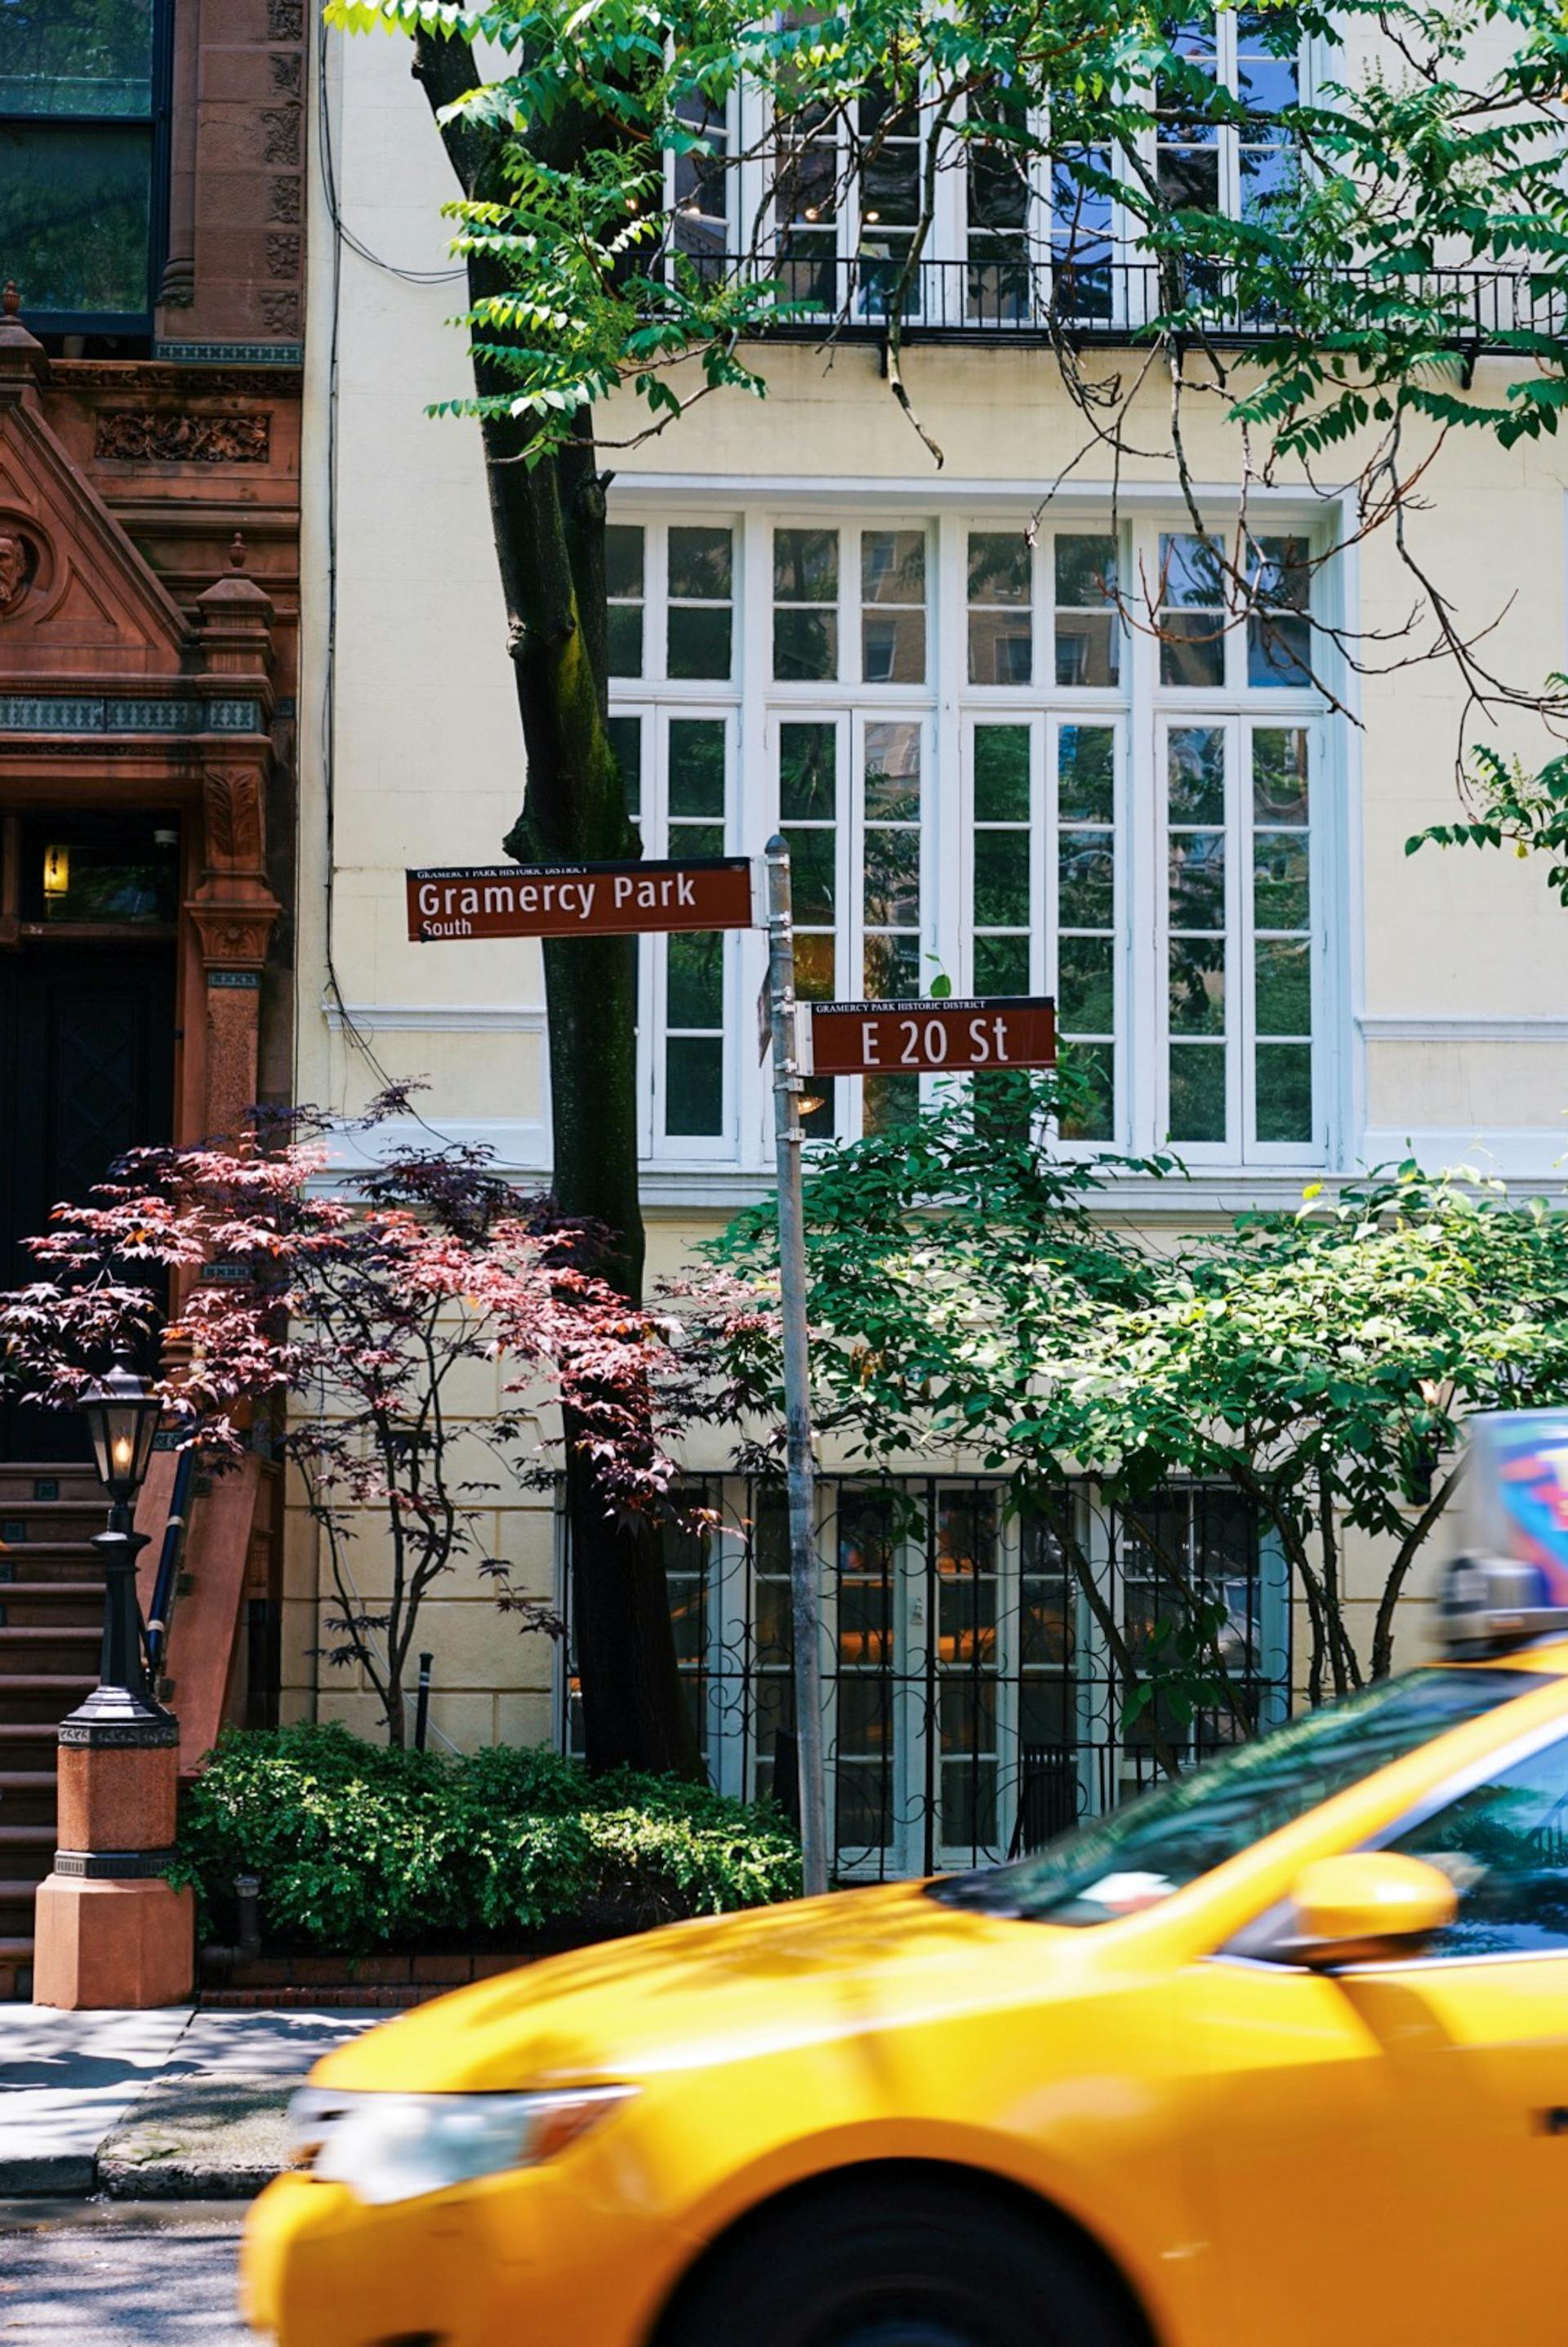 A yellow cab parked in front of a house | Source: Pexels